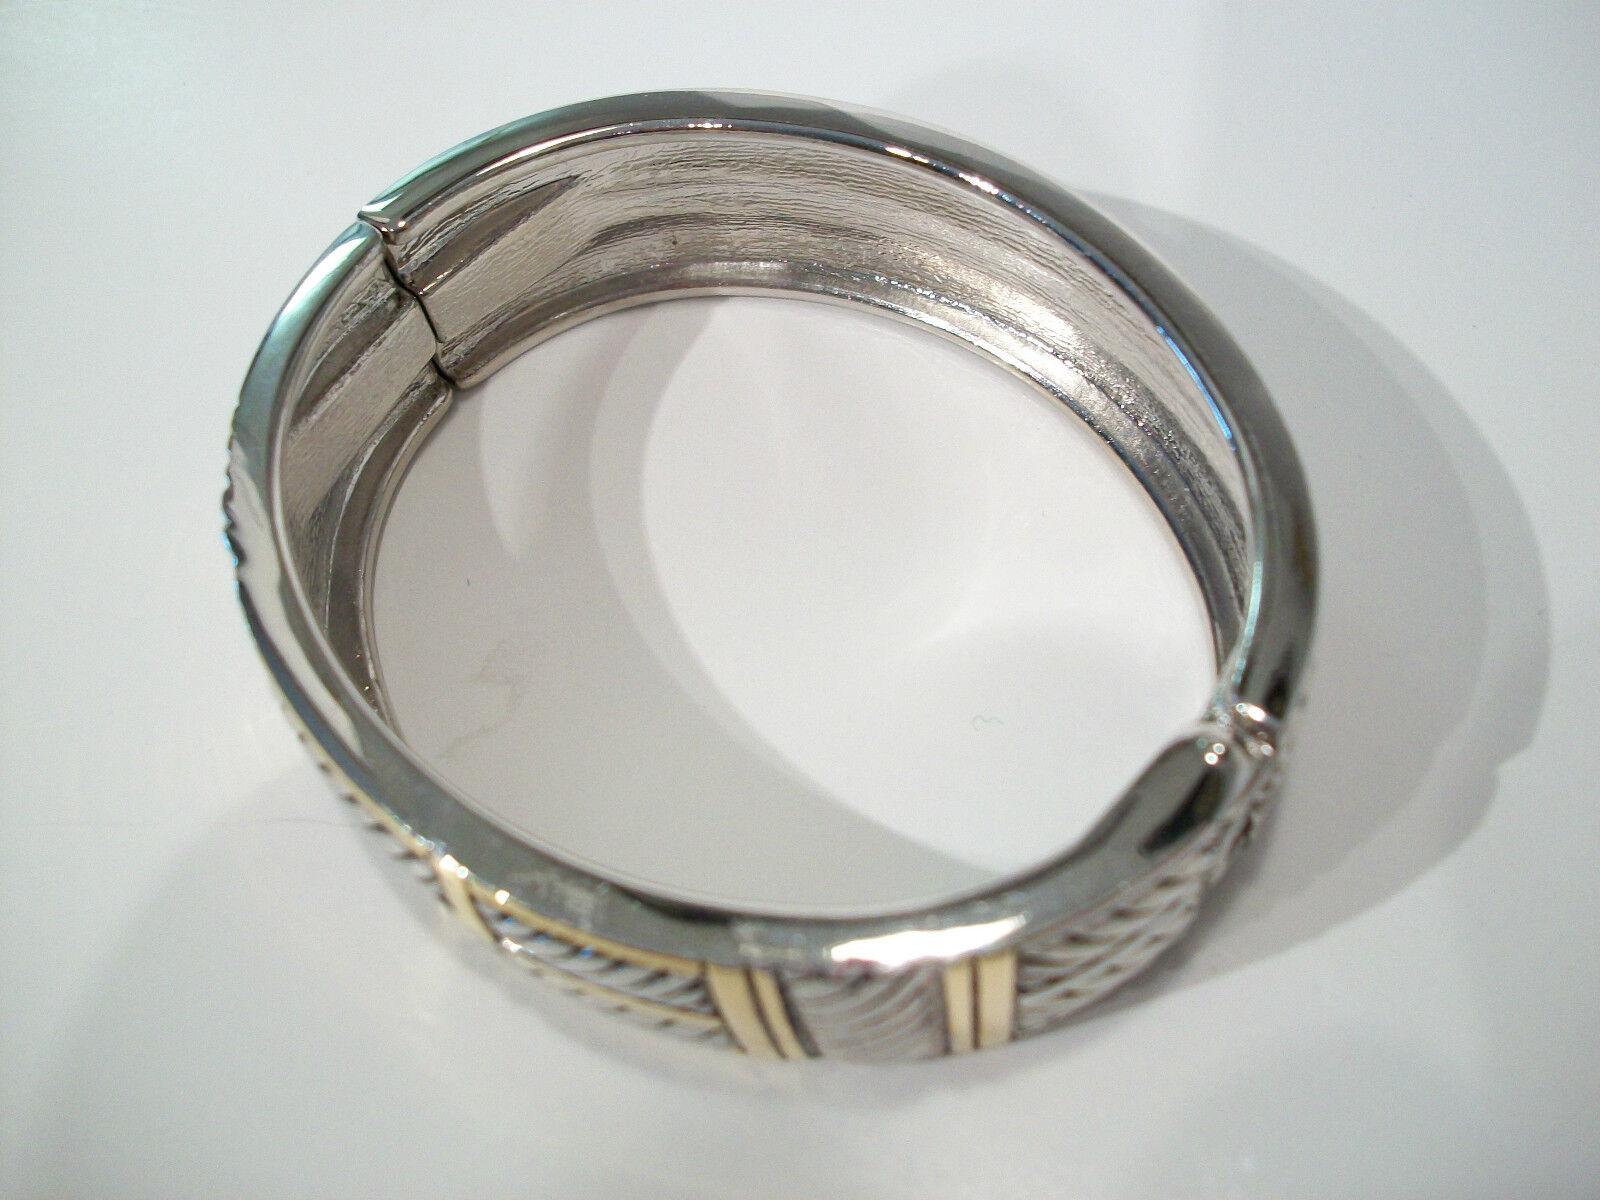 Vintage Hinged Two Tone Metal Clamper Bangle Bracelet - Unsigned - Circa 1980's For Sale 3